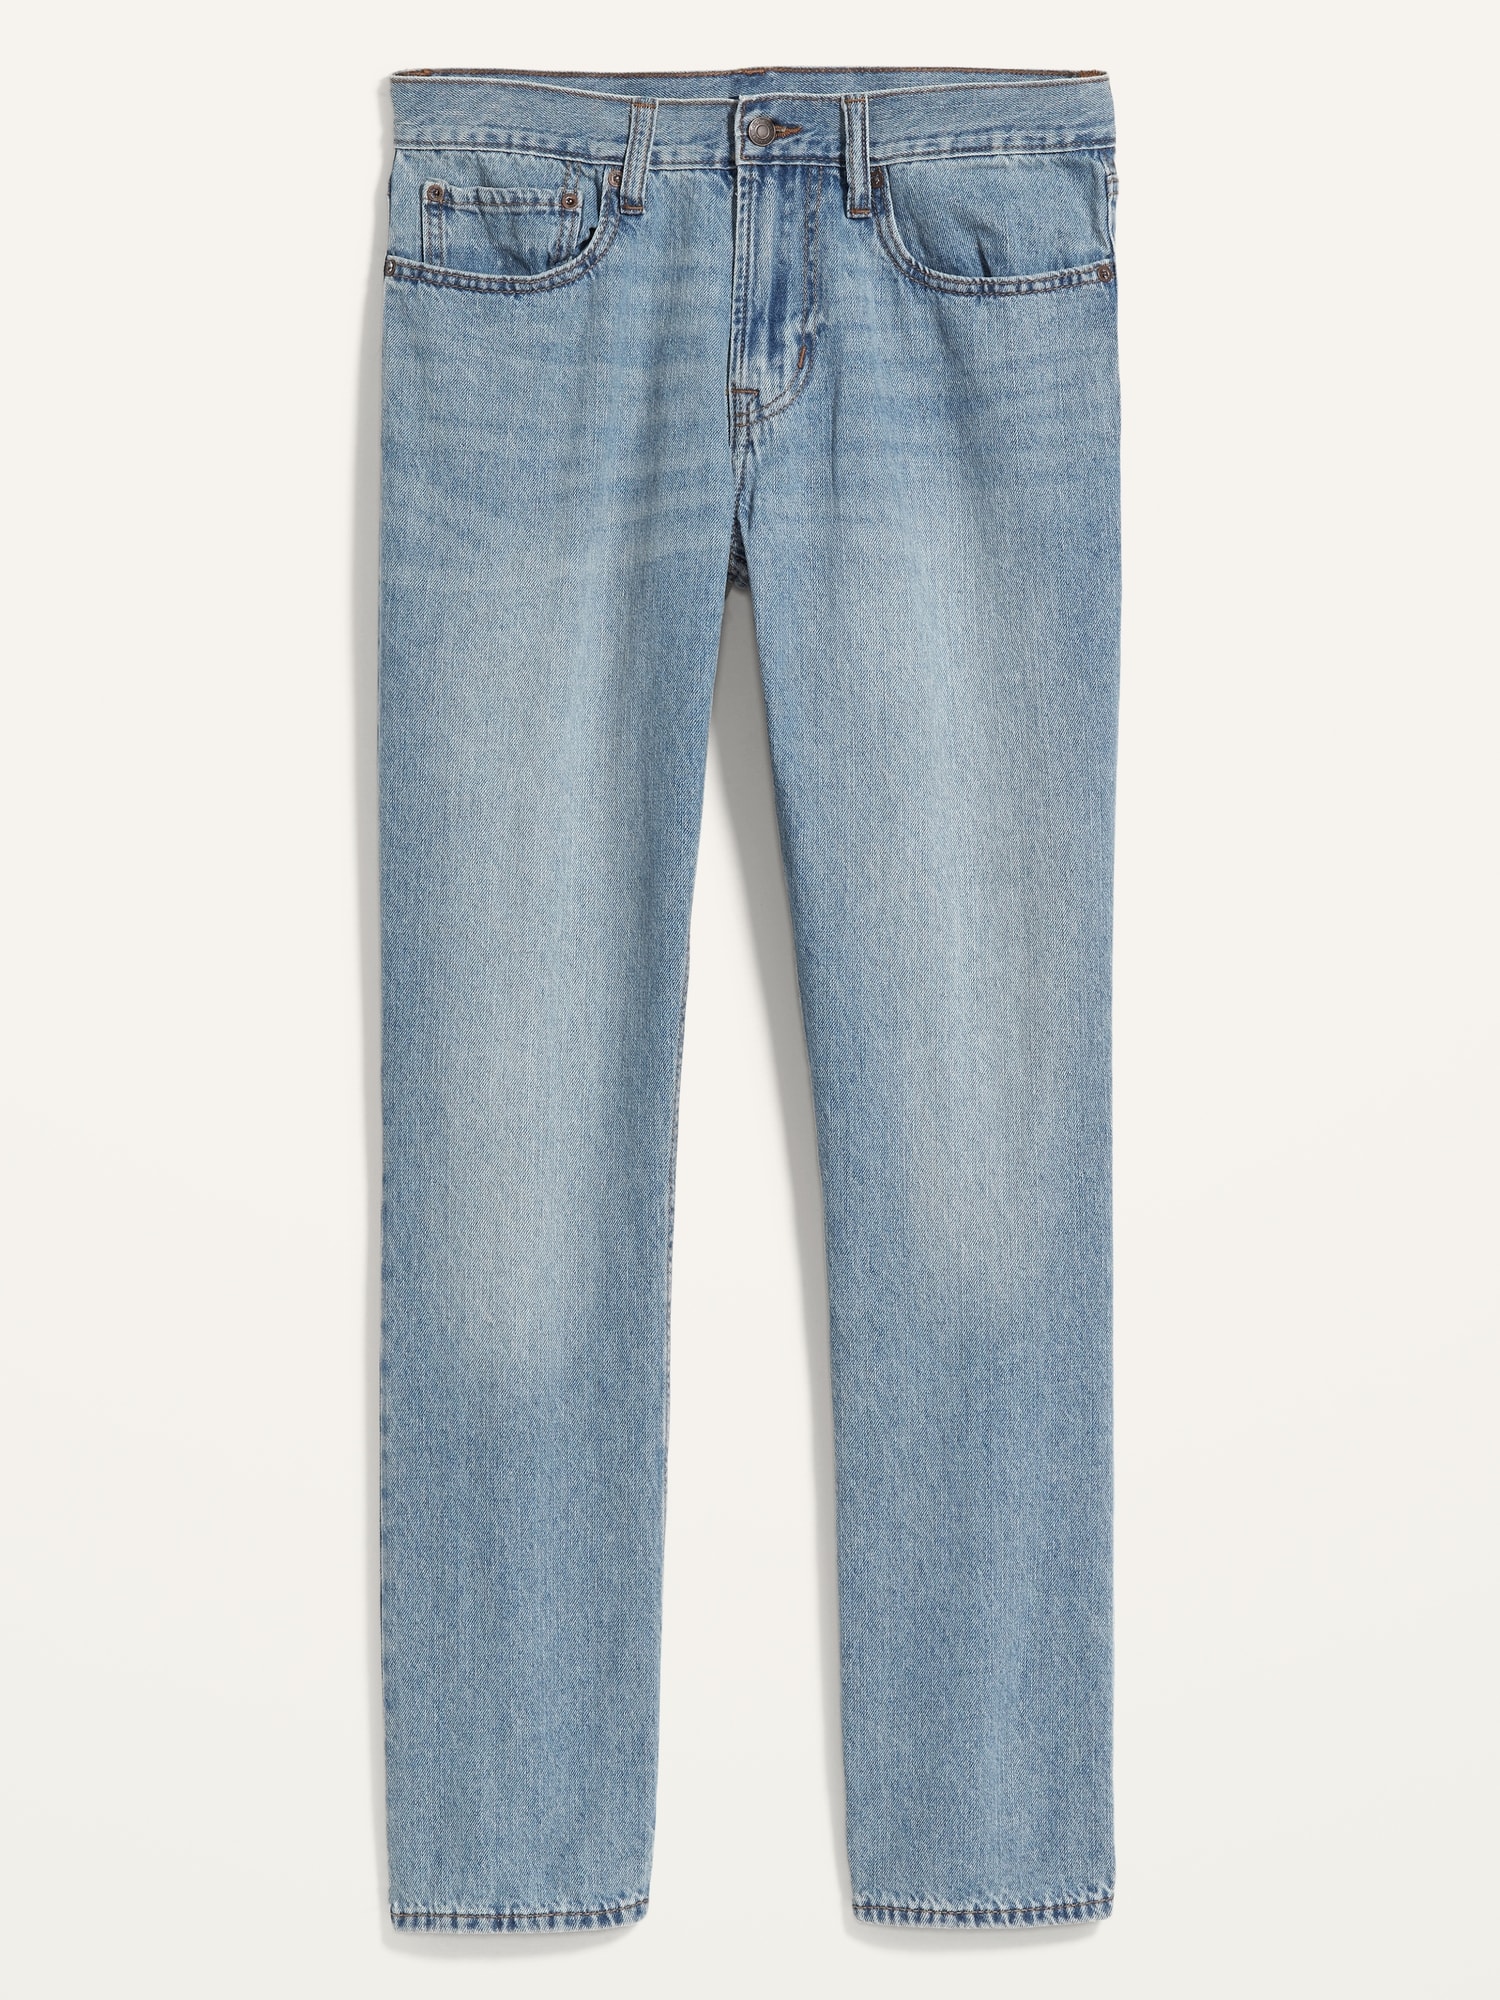 Wow Straight Non-Stretch Jeans